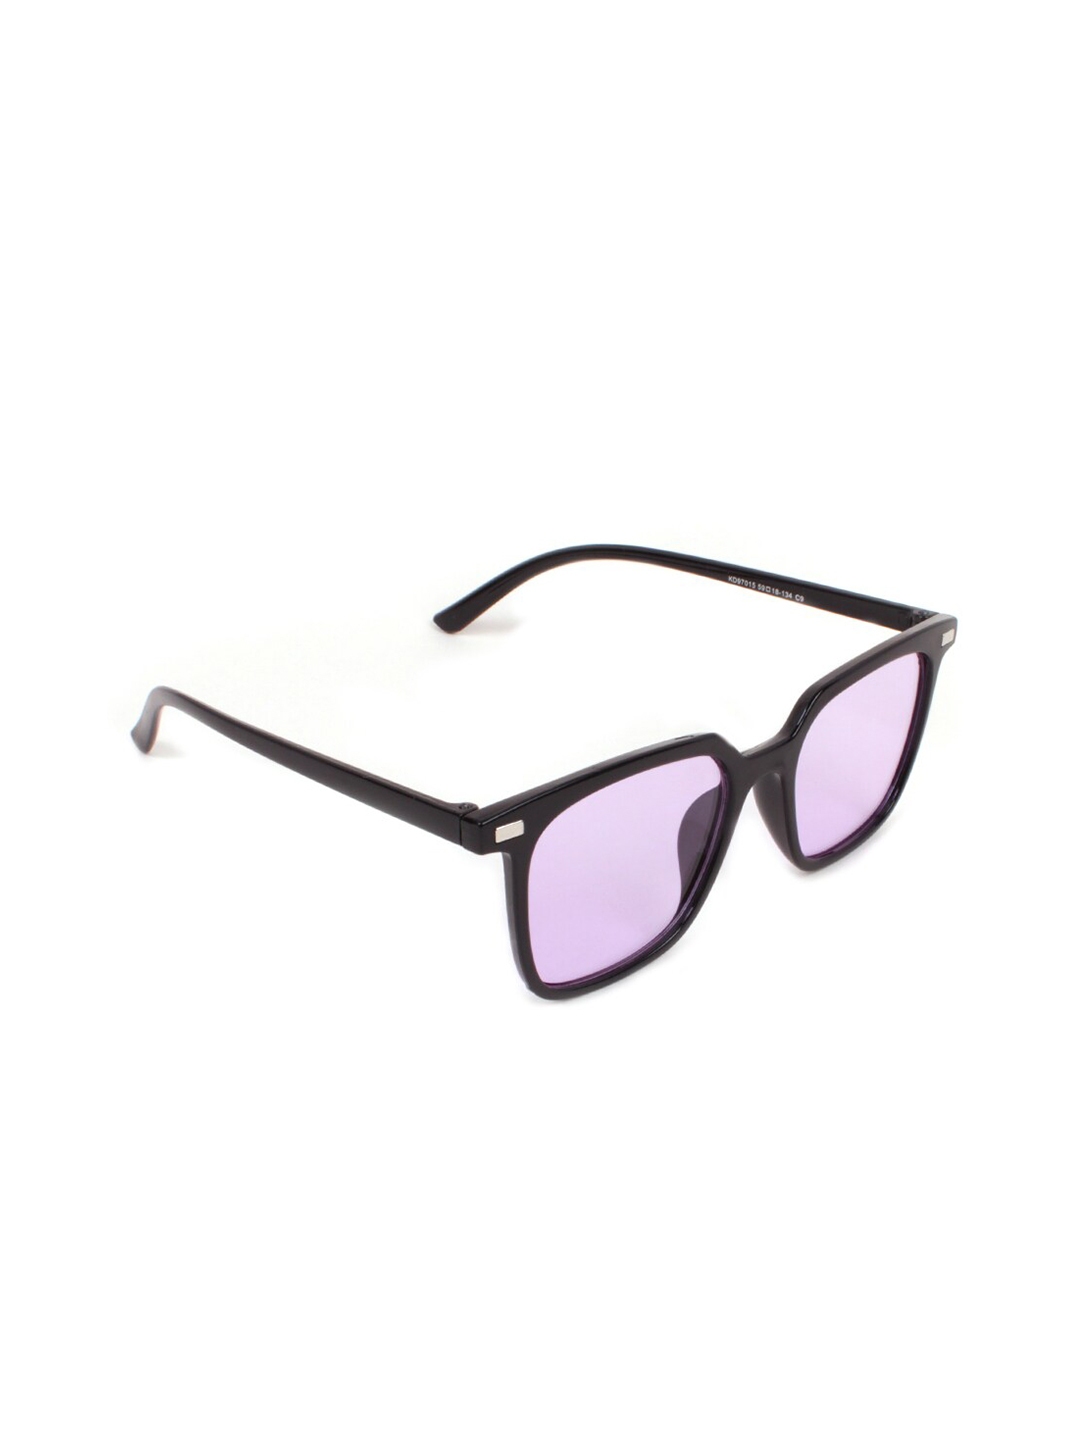 Buy Quirky Square Sunglasses With Uv Protected Lens Sunglasses For Unisex Myntra